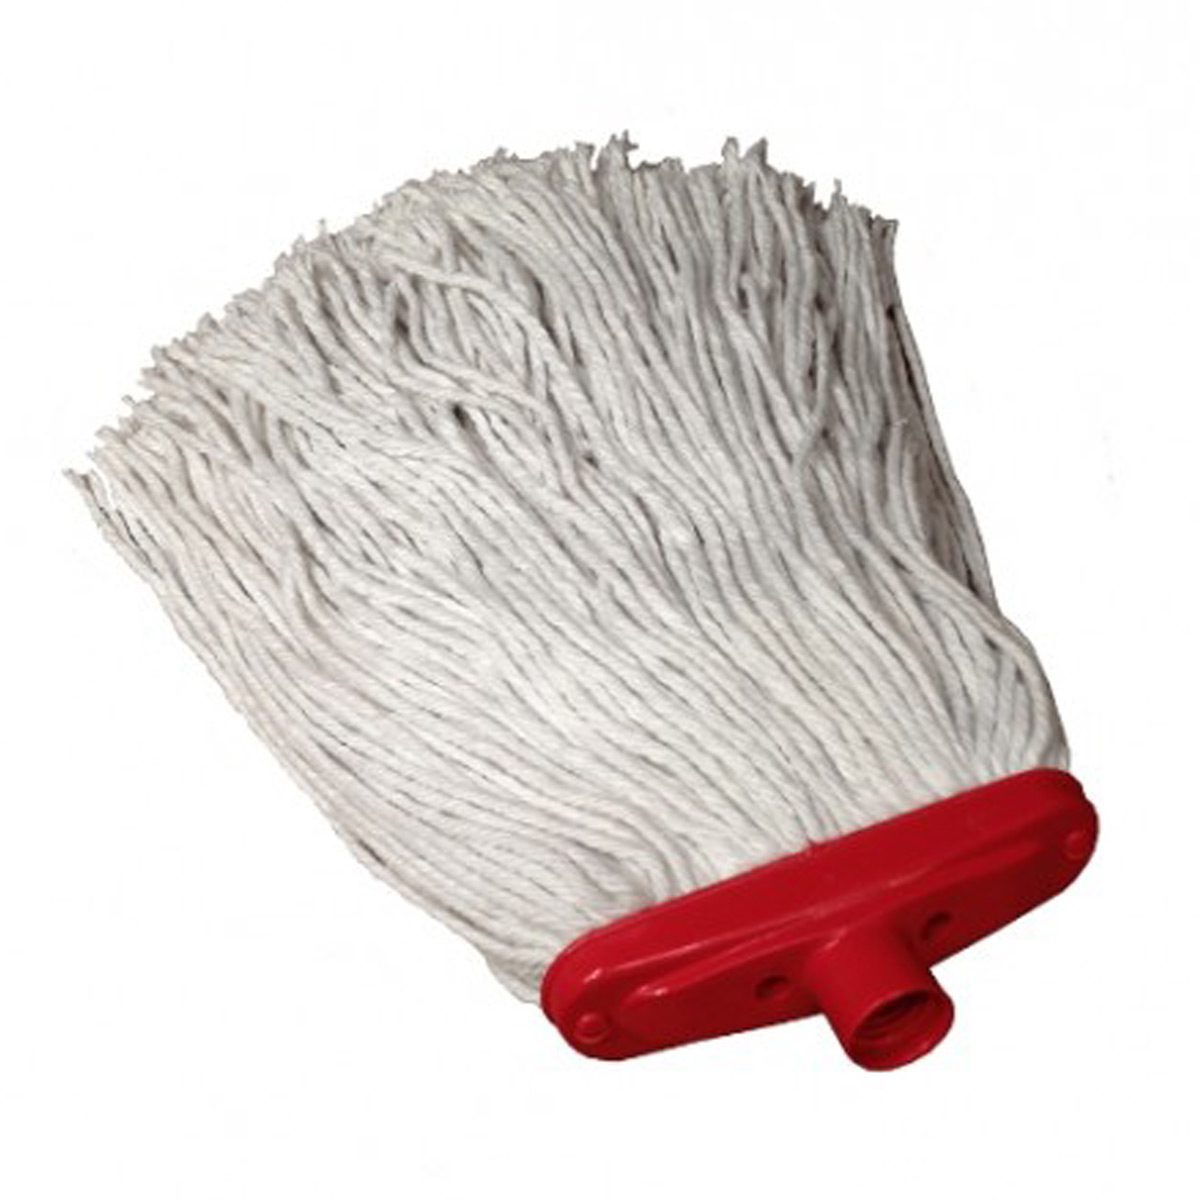 cleaning-equipment-mops-threaded-rayon-20-mop-head-only-white-rayon-blend-string-mop-head-vjs-distributors-RBAL491